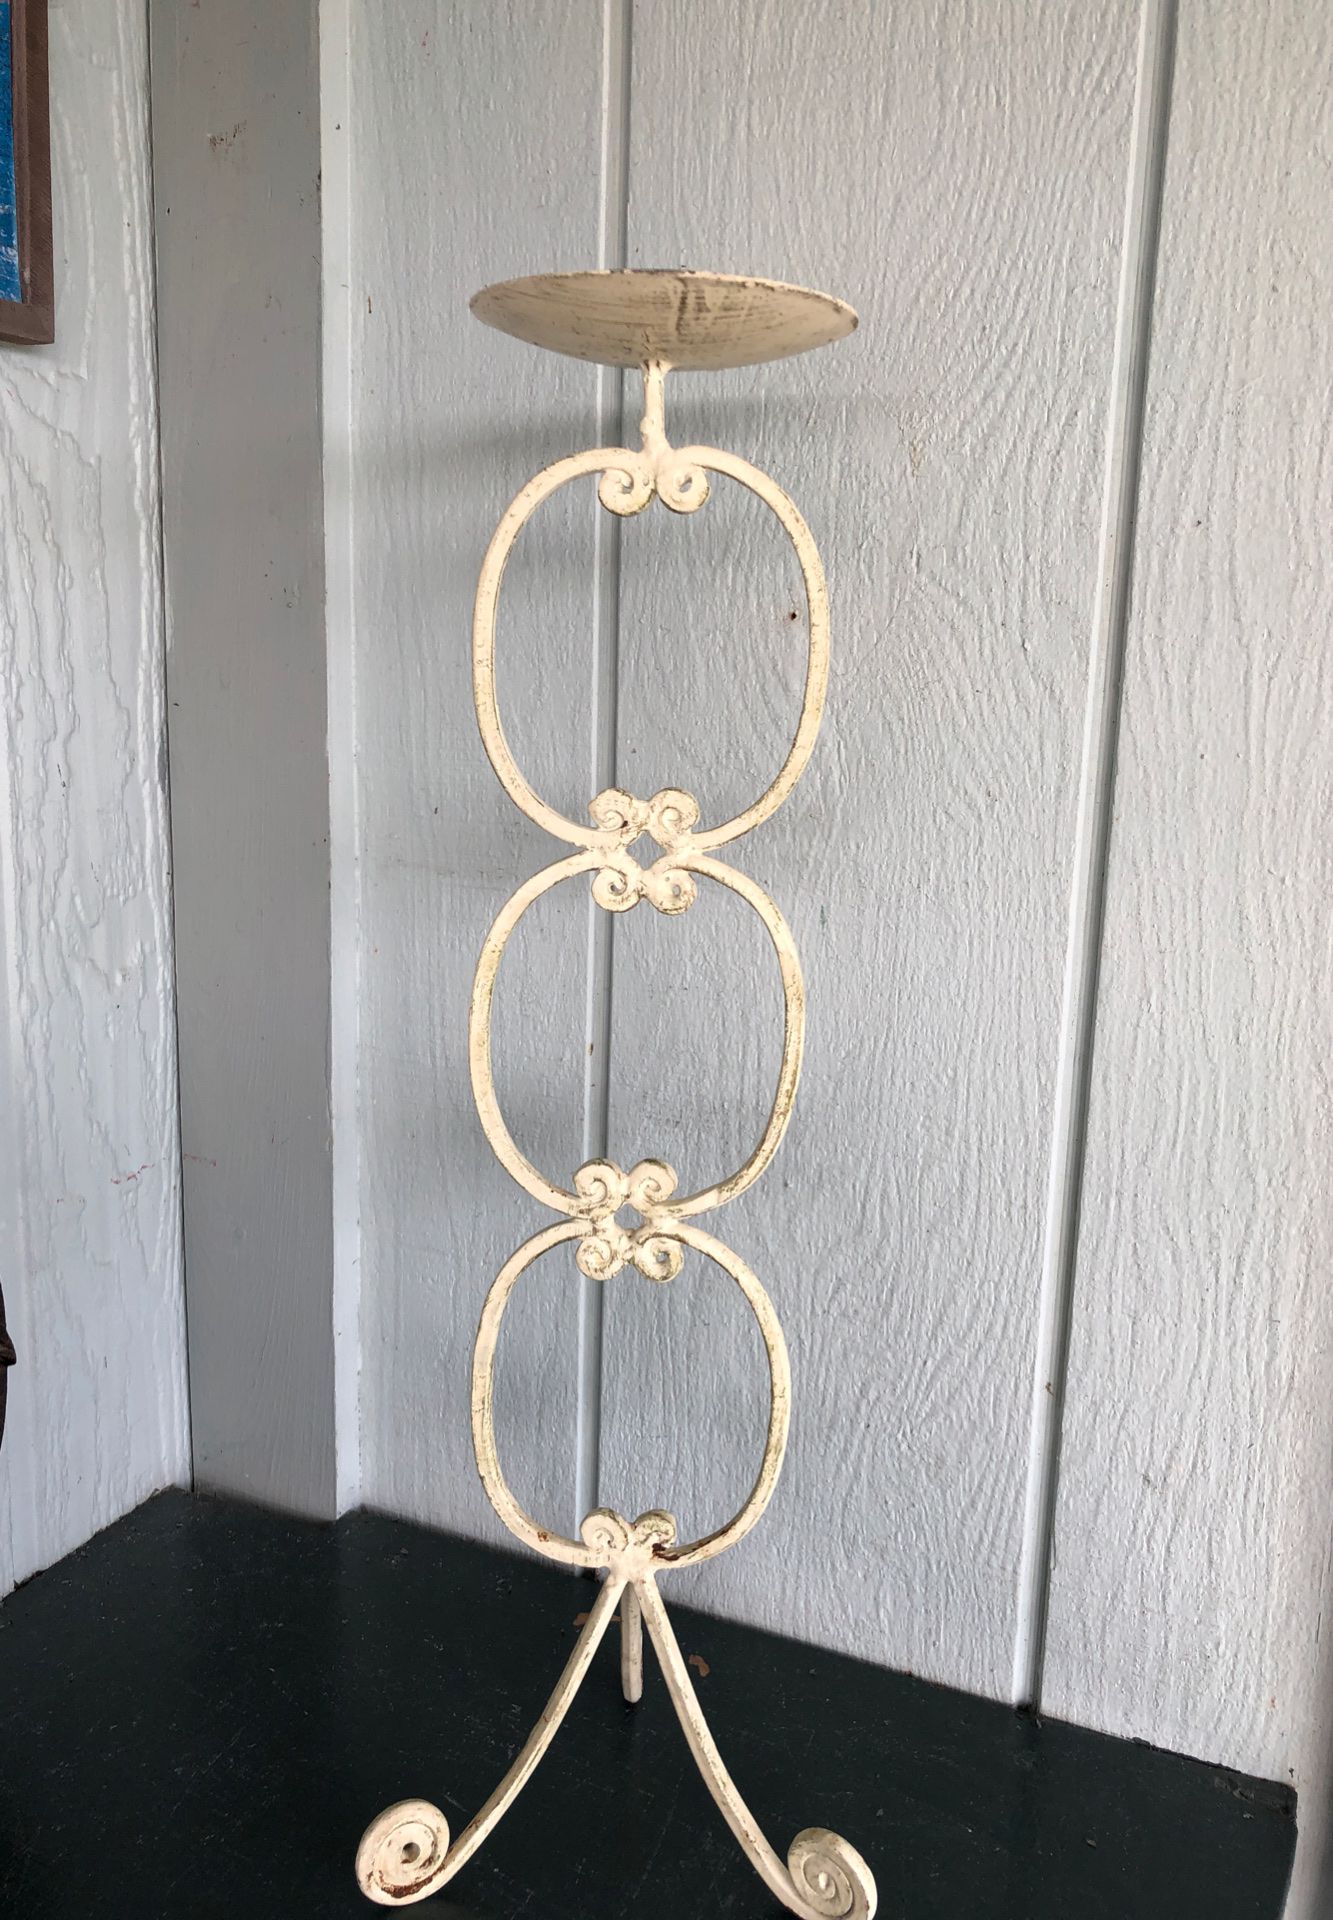 Shabby chic candle holder